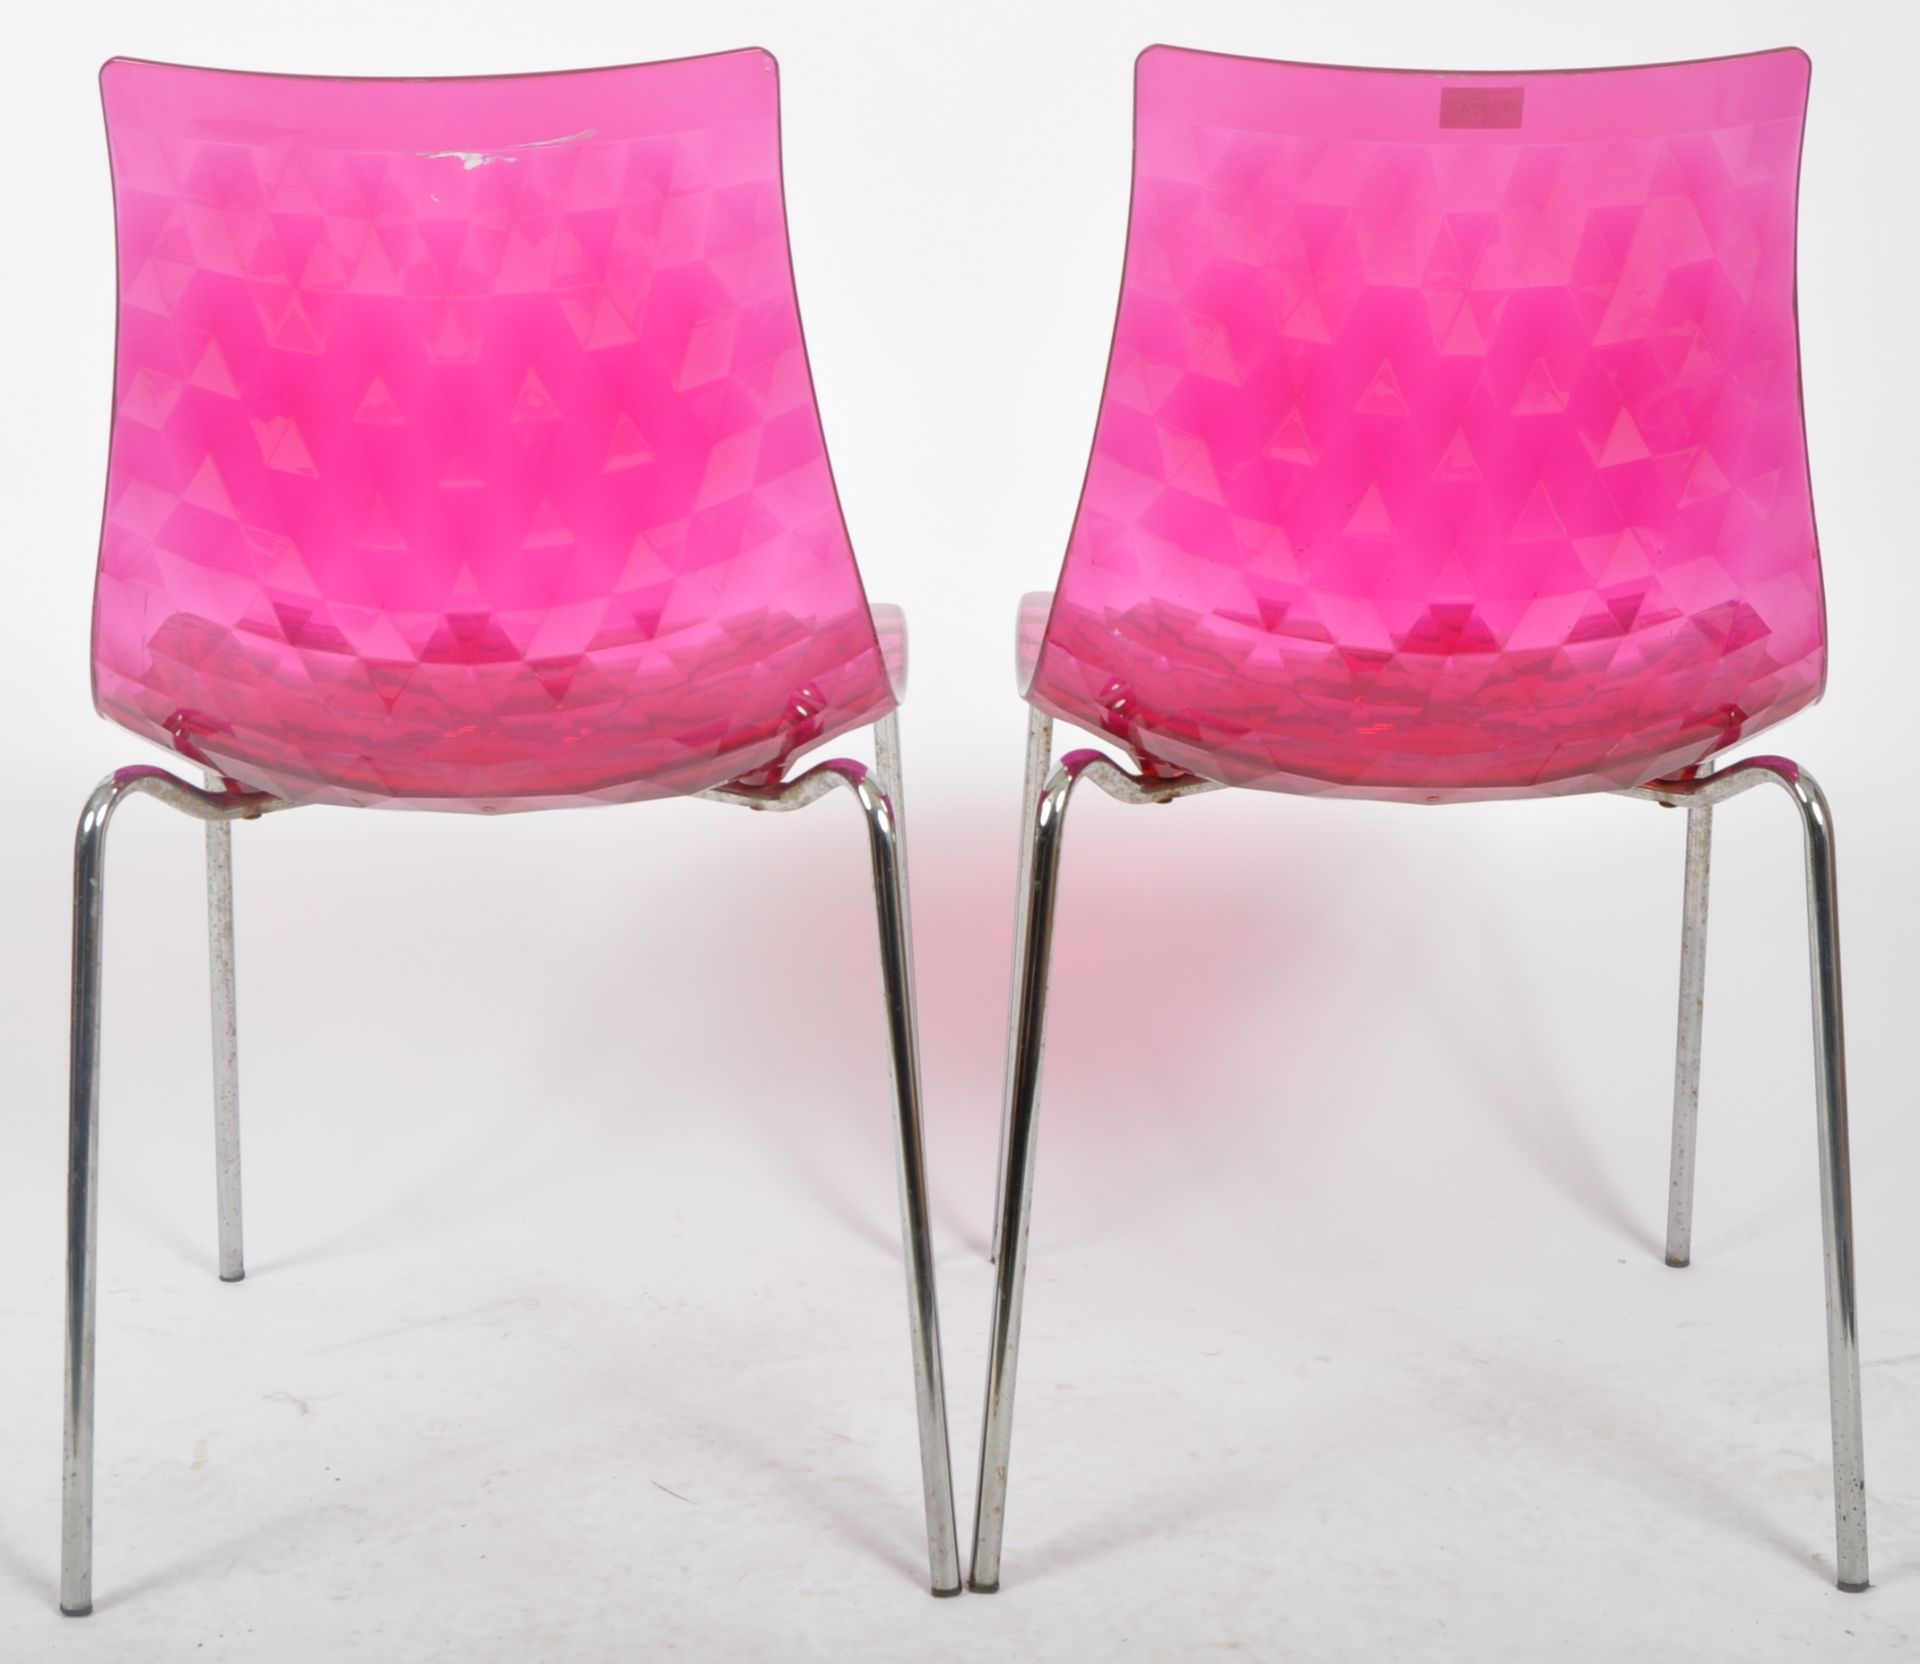 CALLIGARIS - ICE CHAIRS - TWO 80s ITALIAN DESIGNED CHAIRS - Image 3 of 5